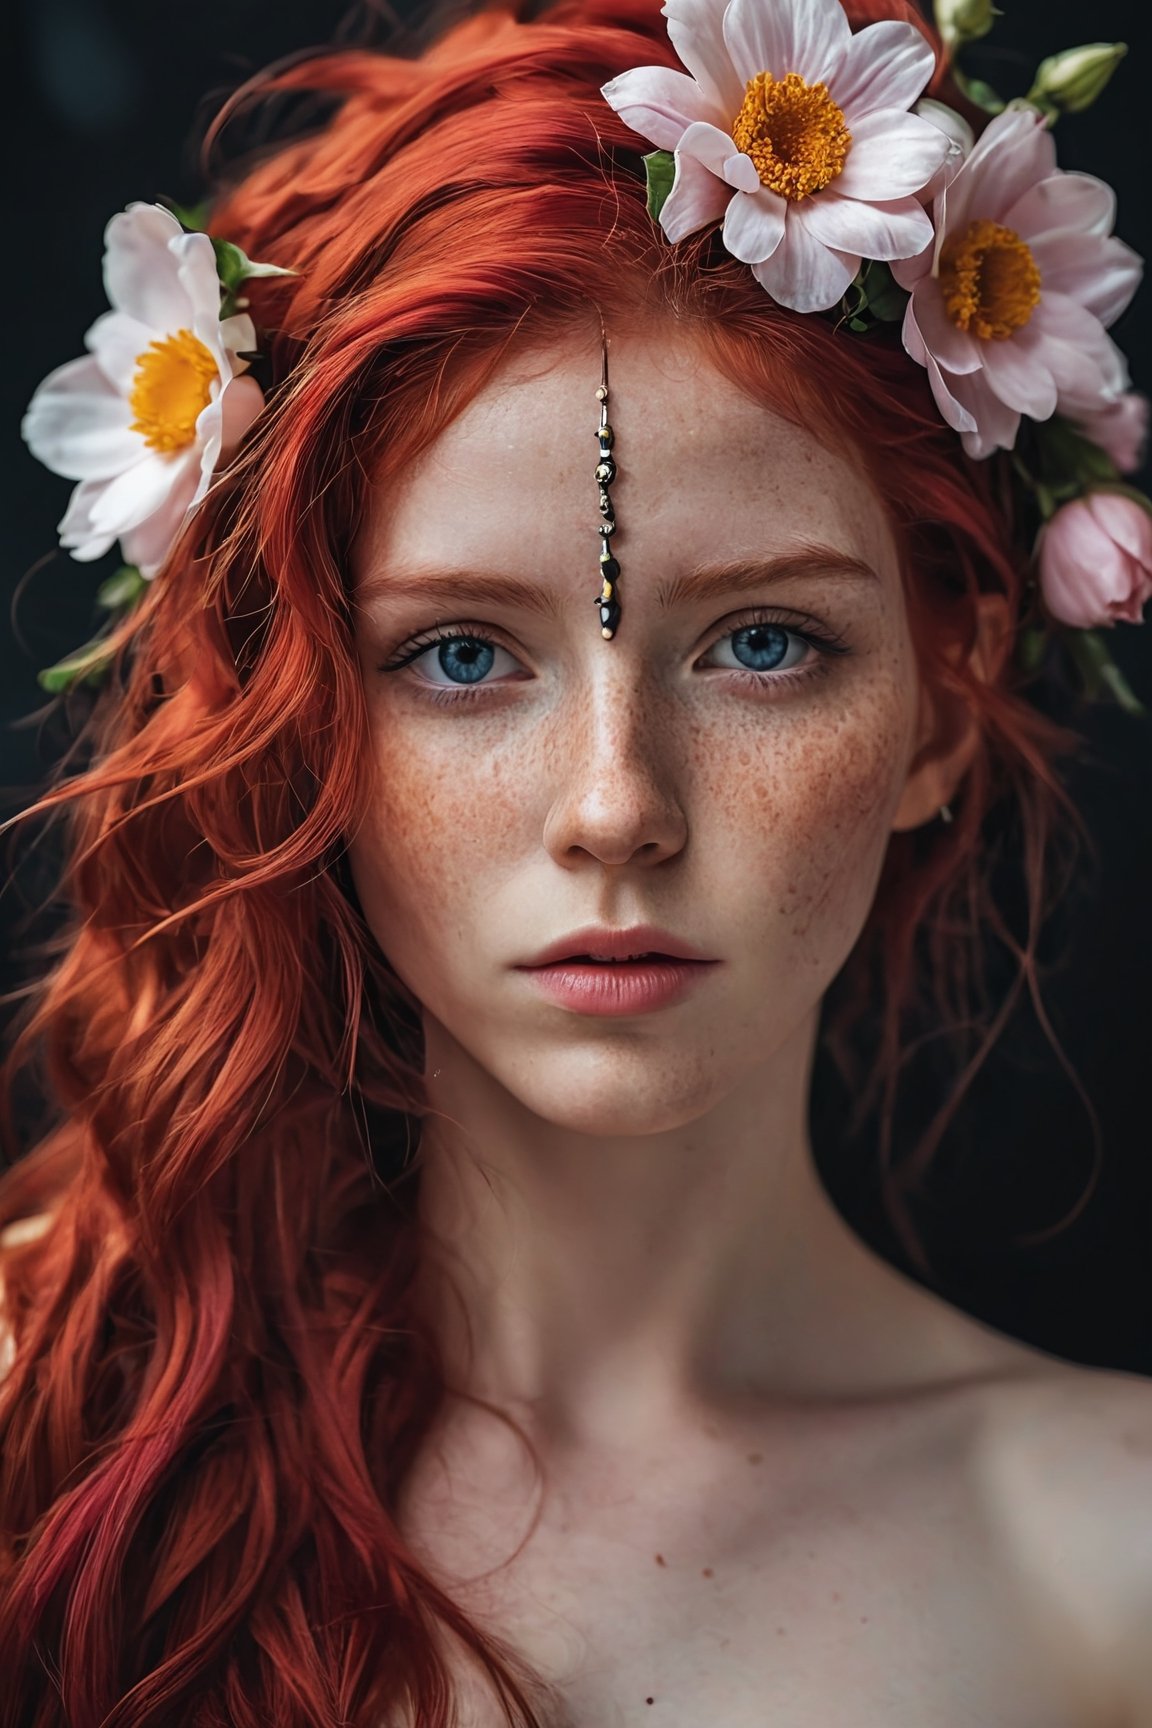 A photo of a (woman adorned with flowers:1.3), (vivid red hair:1.2), (piercing gaze:1.4), floral headpiece, (soft petals against skin:1.1), (natural beauty:1.2), (contrast of colors:1.3), intimate portrait, Canon EOS 5D Mark IV, 1/200s, f/2.8, ISO 100, (depth of field:1.1), (delicate bloom textures:1.2), (poetic composition:1.3).
,aw0k illuminate